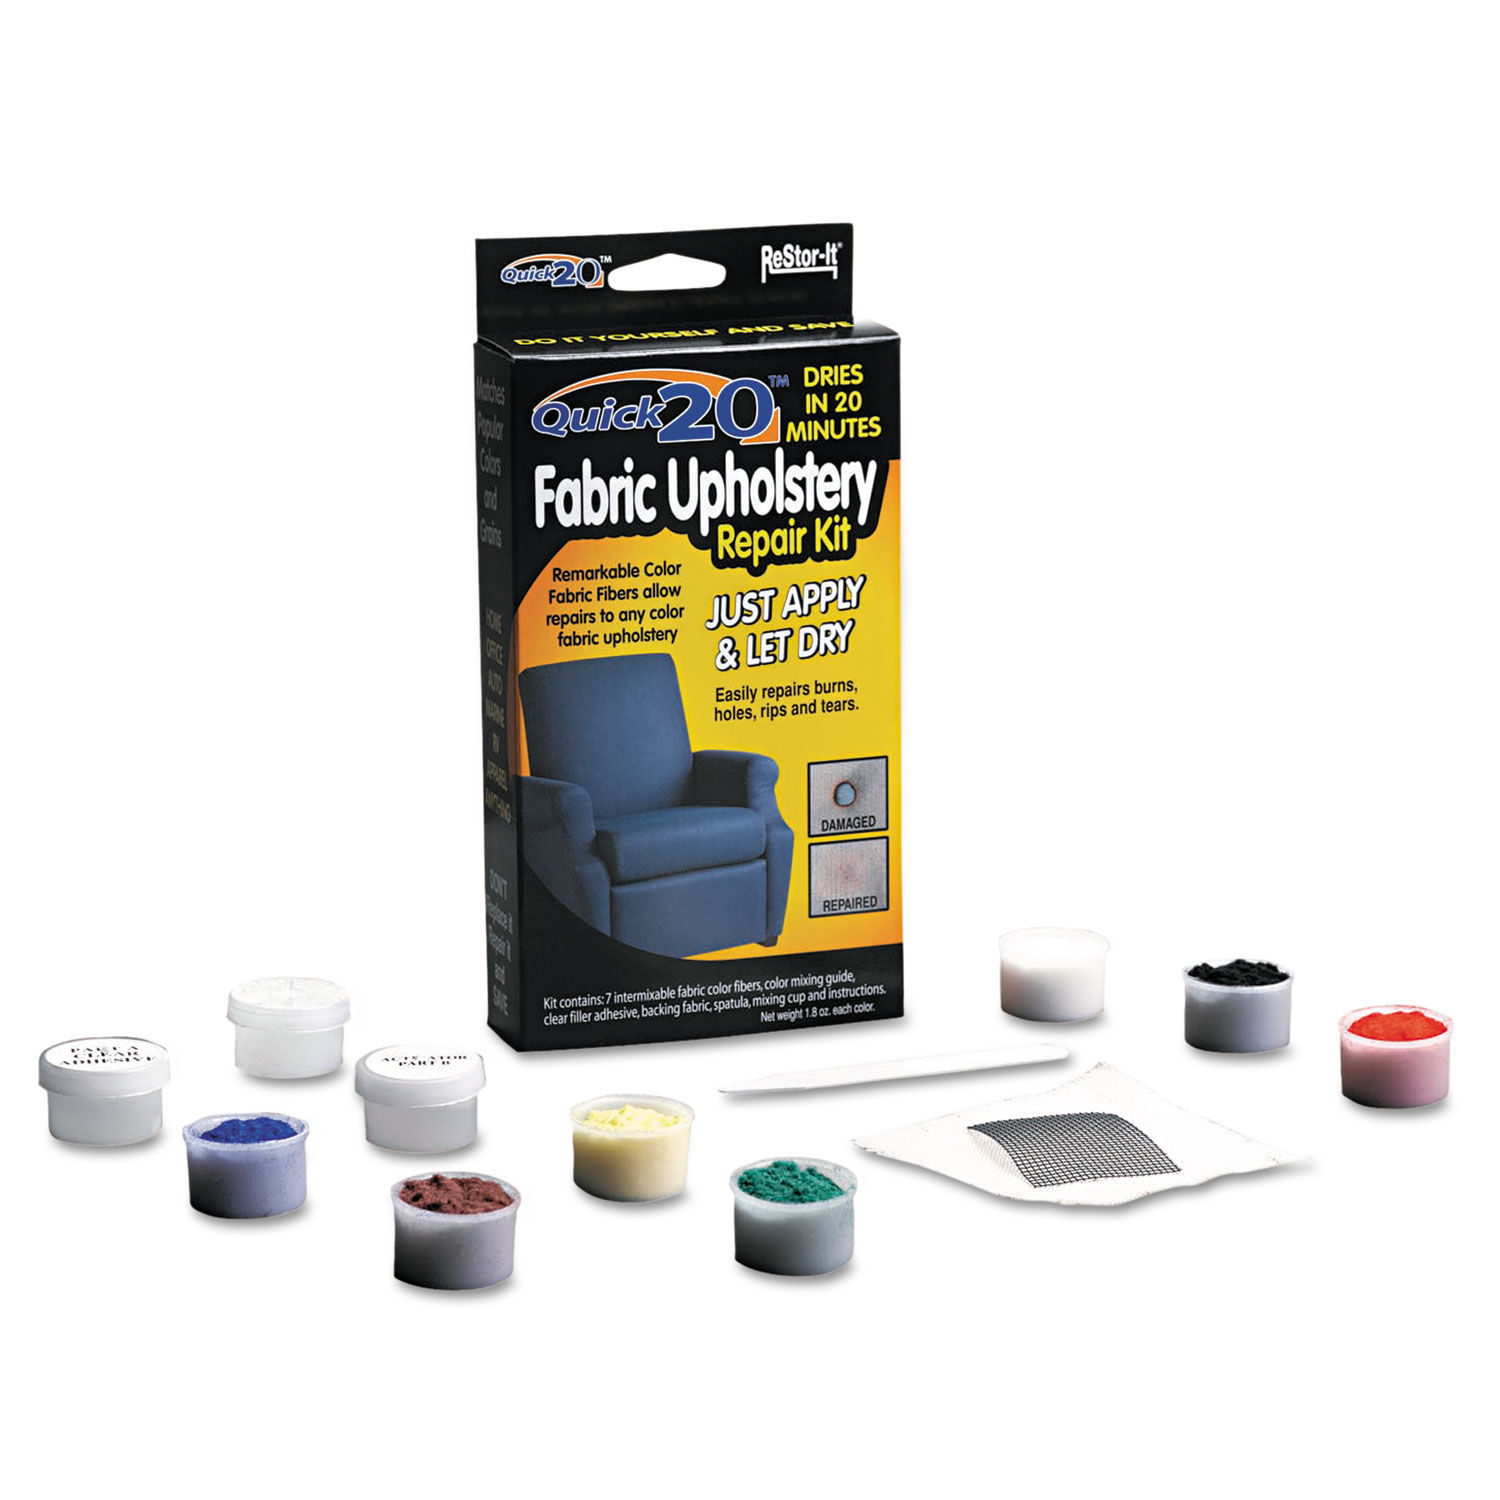 ReStor-It Quick 20 Fabric/Upholstery Repair Kit by Master Caster